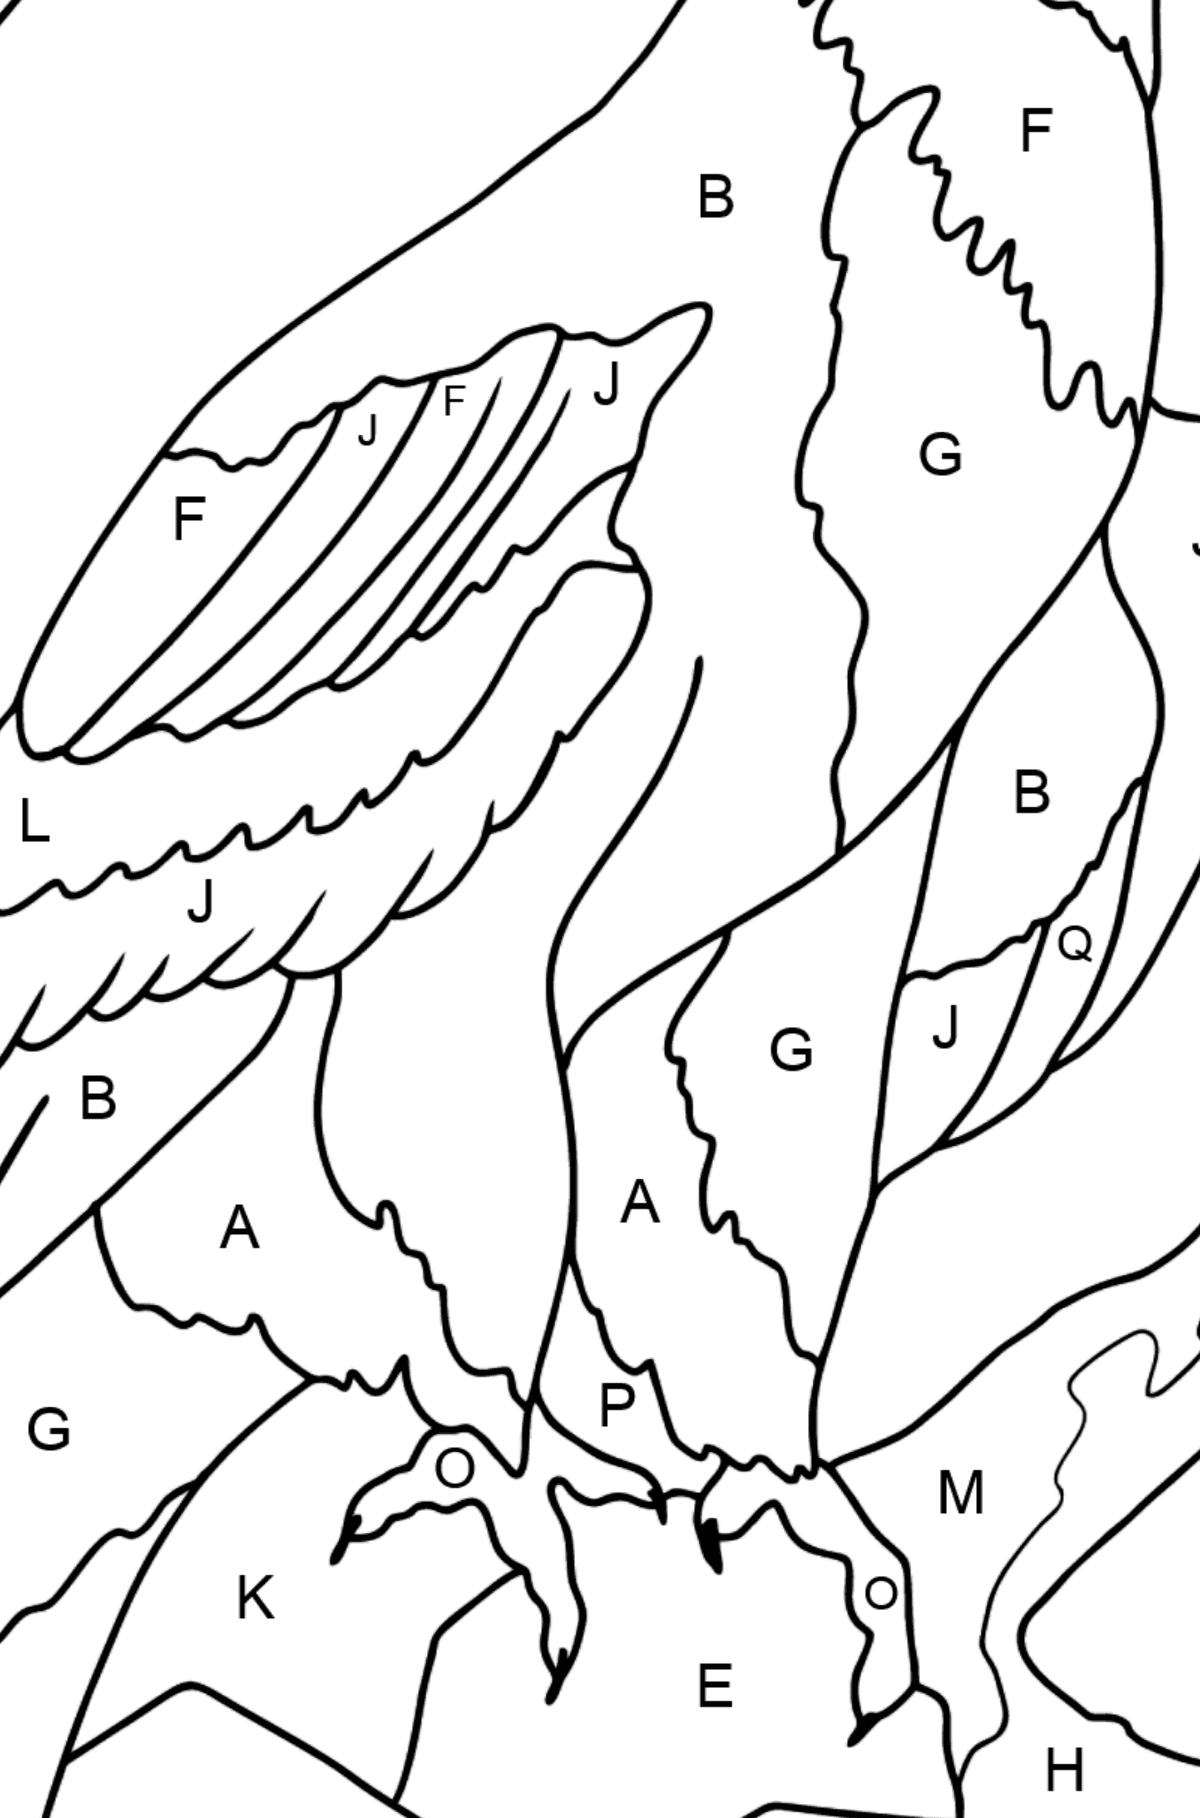 Coloring Page - An Eagle is Looking for Prey - Coloring by Letters for Kids